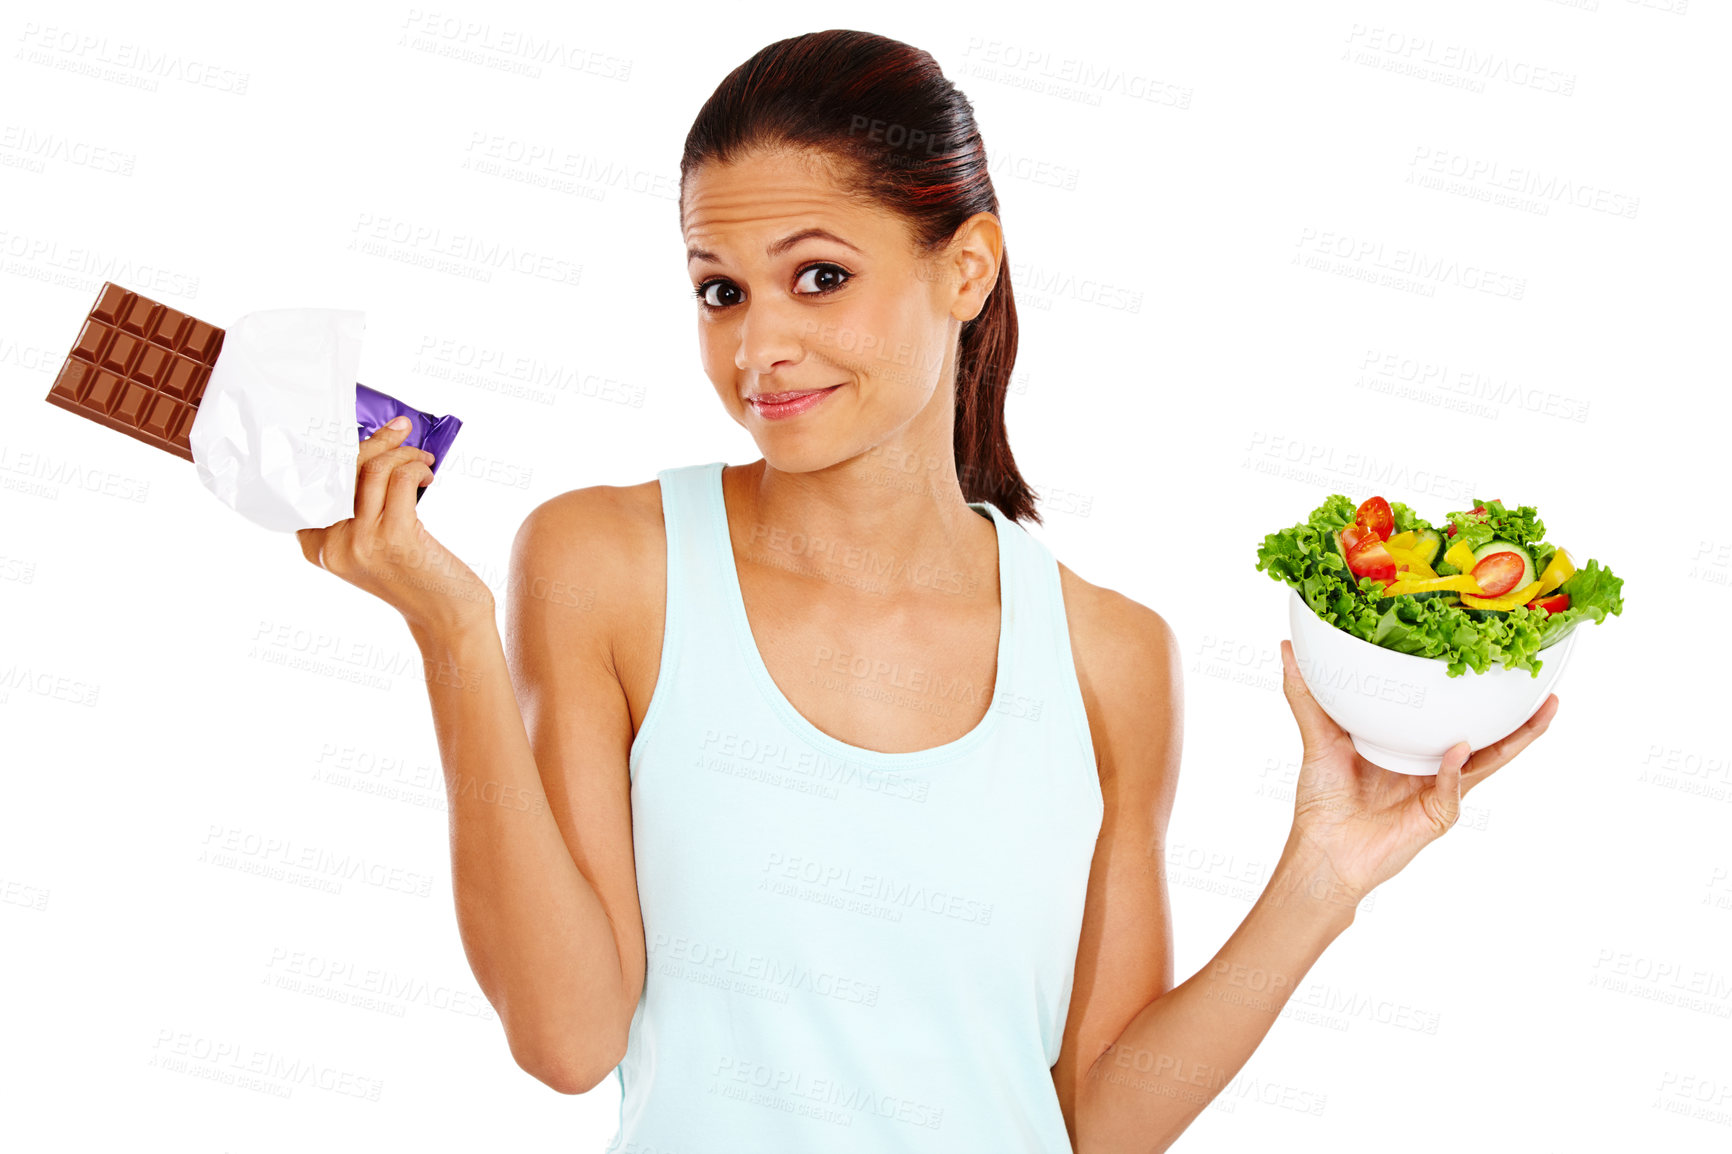 Buy stock photo Portrait of a beautiful young woman choosing between a healthy salad an a chocolate slab